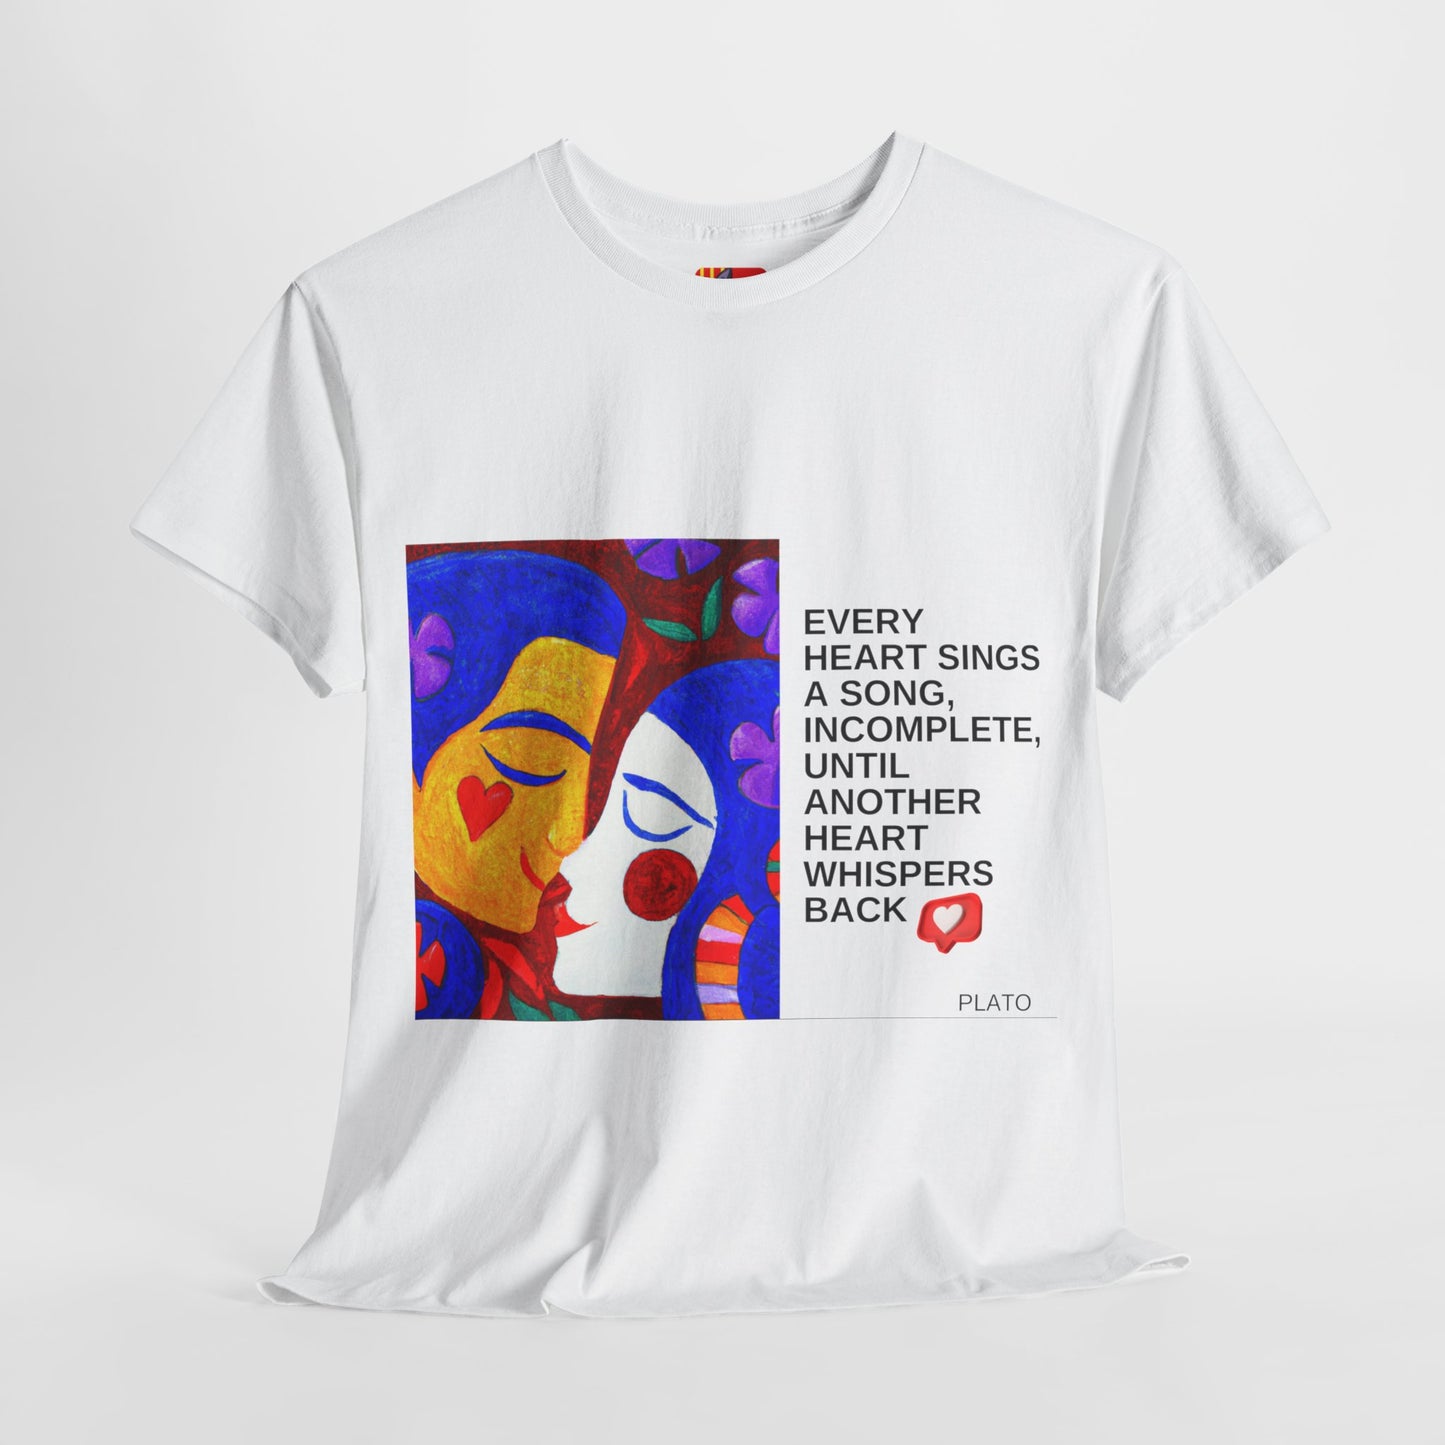 The Love Song T-Shirt: Find Your Harmony"Every heart sings a song"  Plato